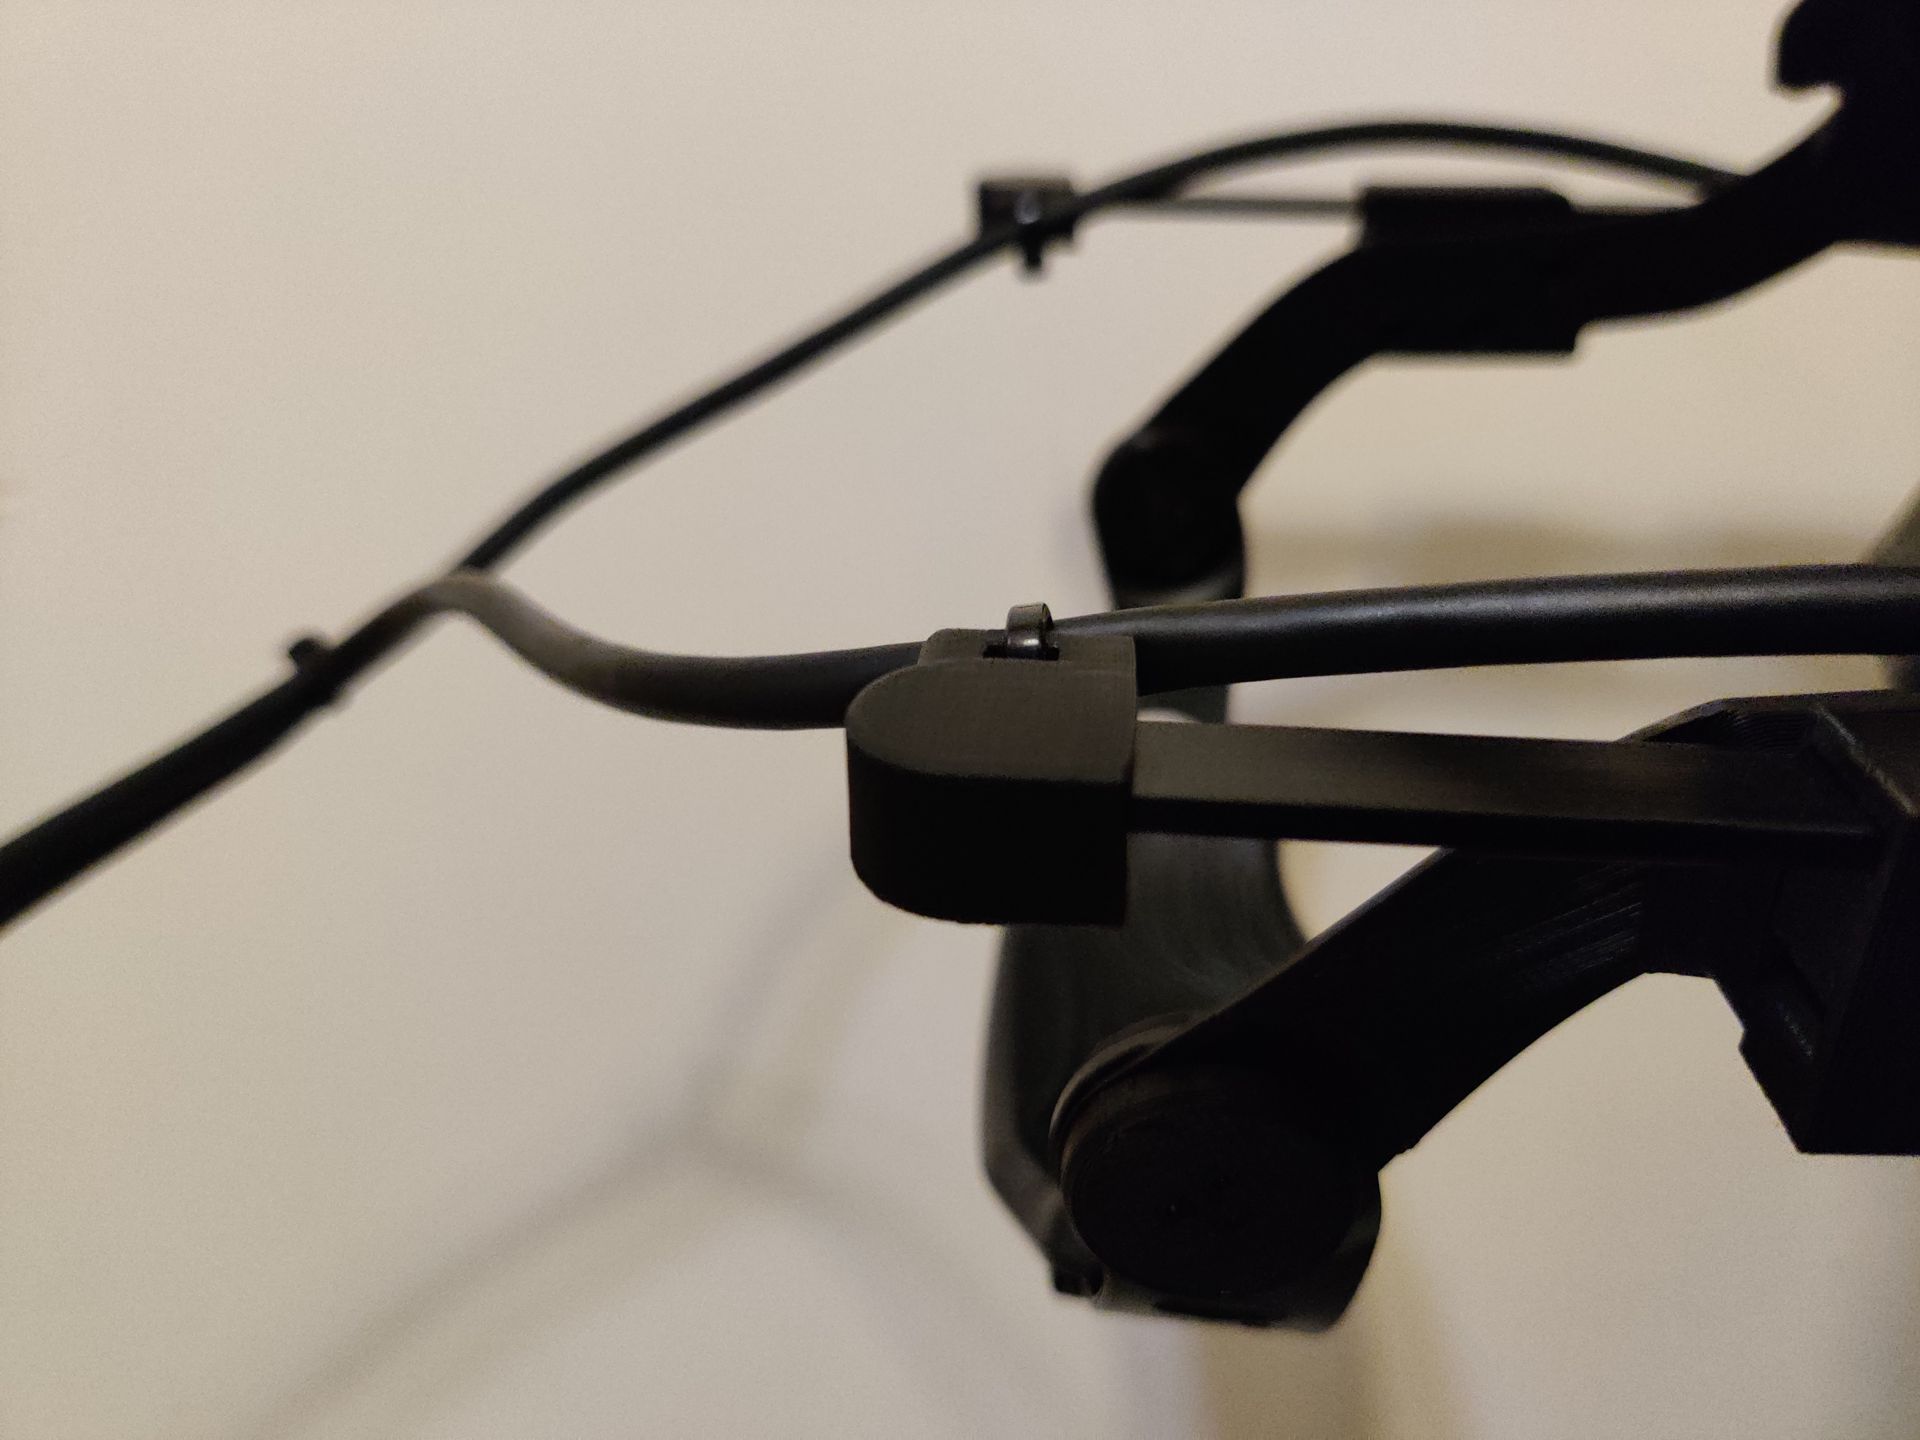 Project North Star headset with two cables